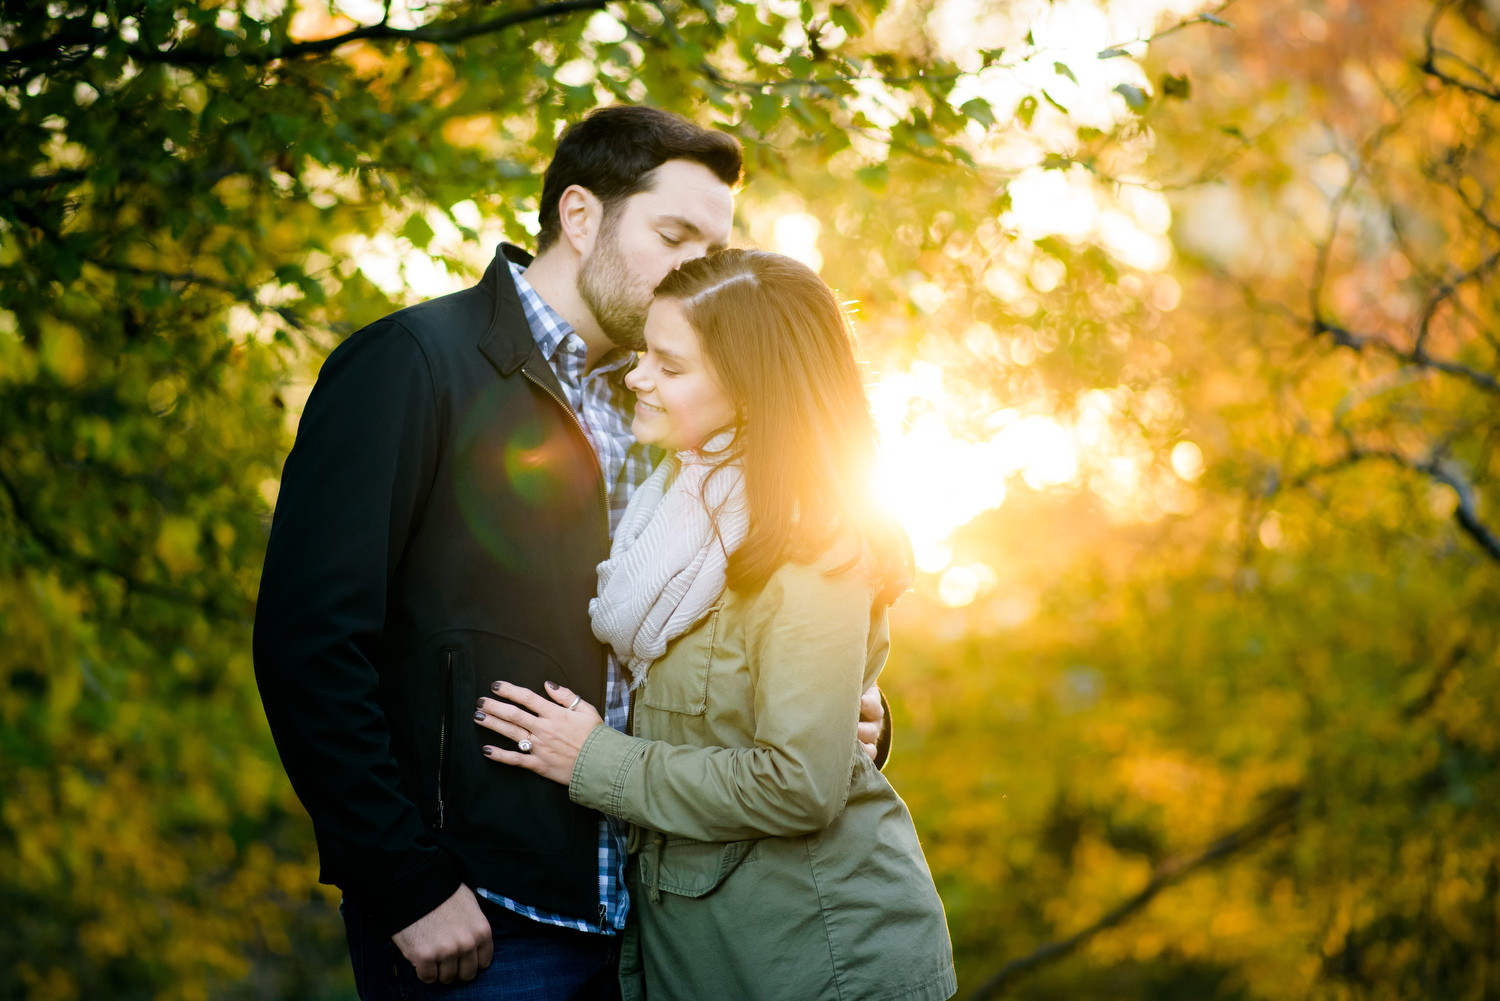 Caldwell Lily Pond engagement photo at sunset in Chicago.